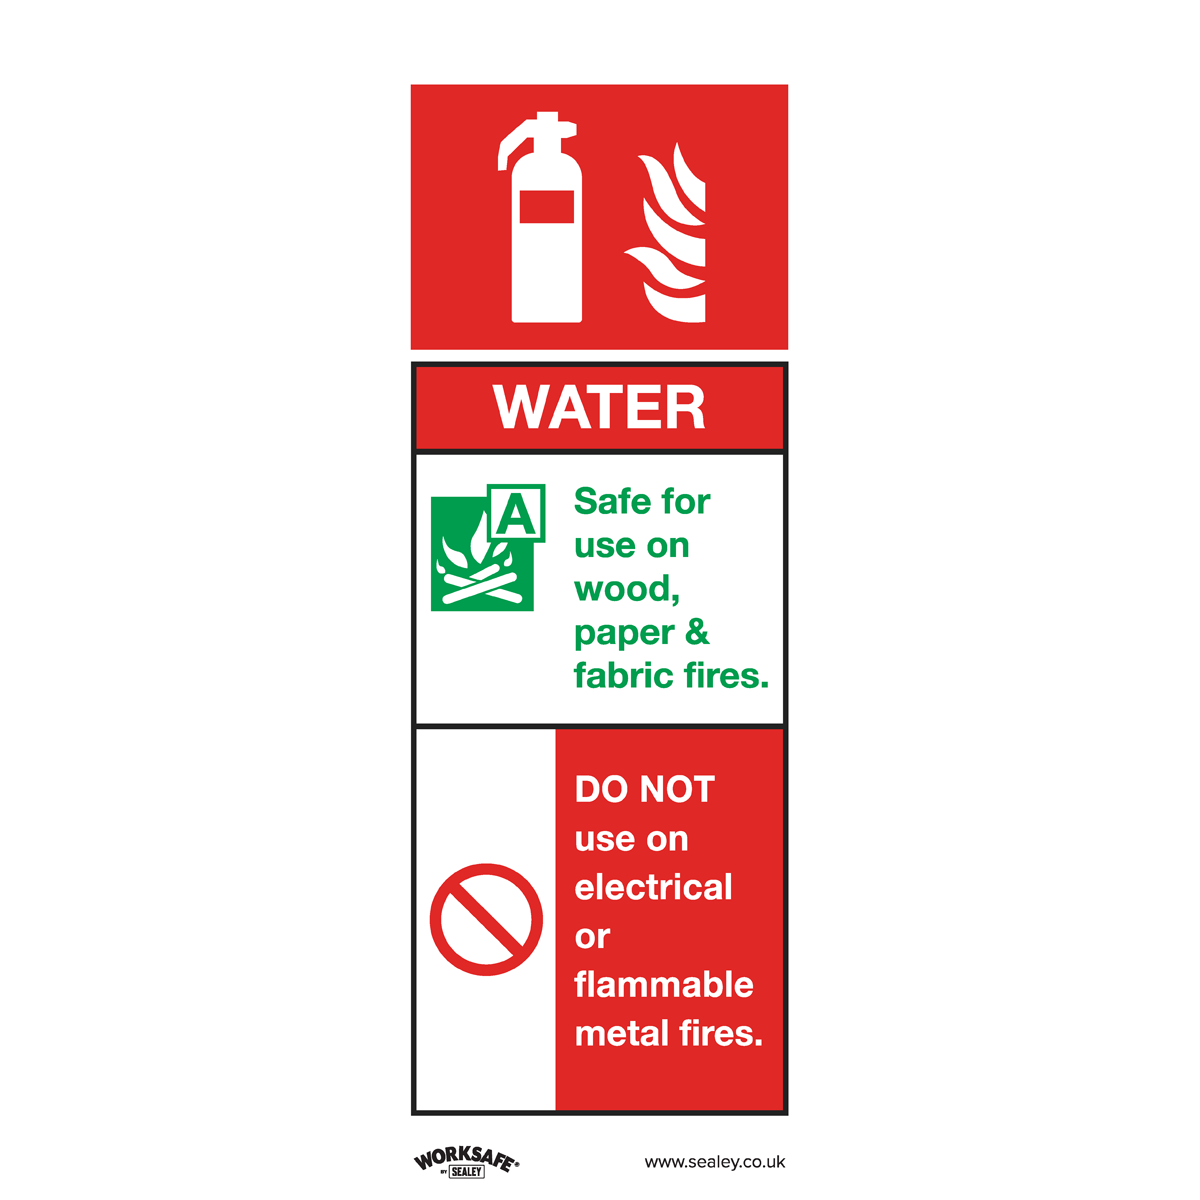 Safe Conditions Safety Sign - Water Fire Extinguisher - Self-Adhesive Vinyl - SS27V1 - Farming Parts